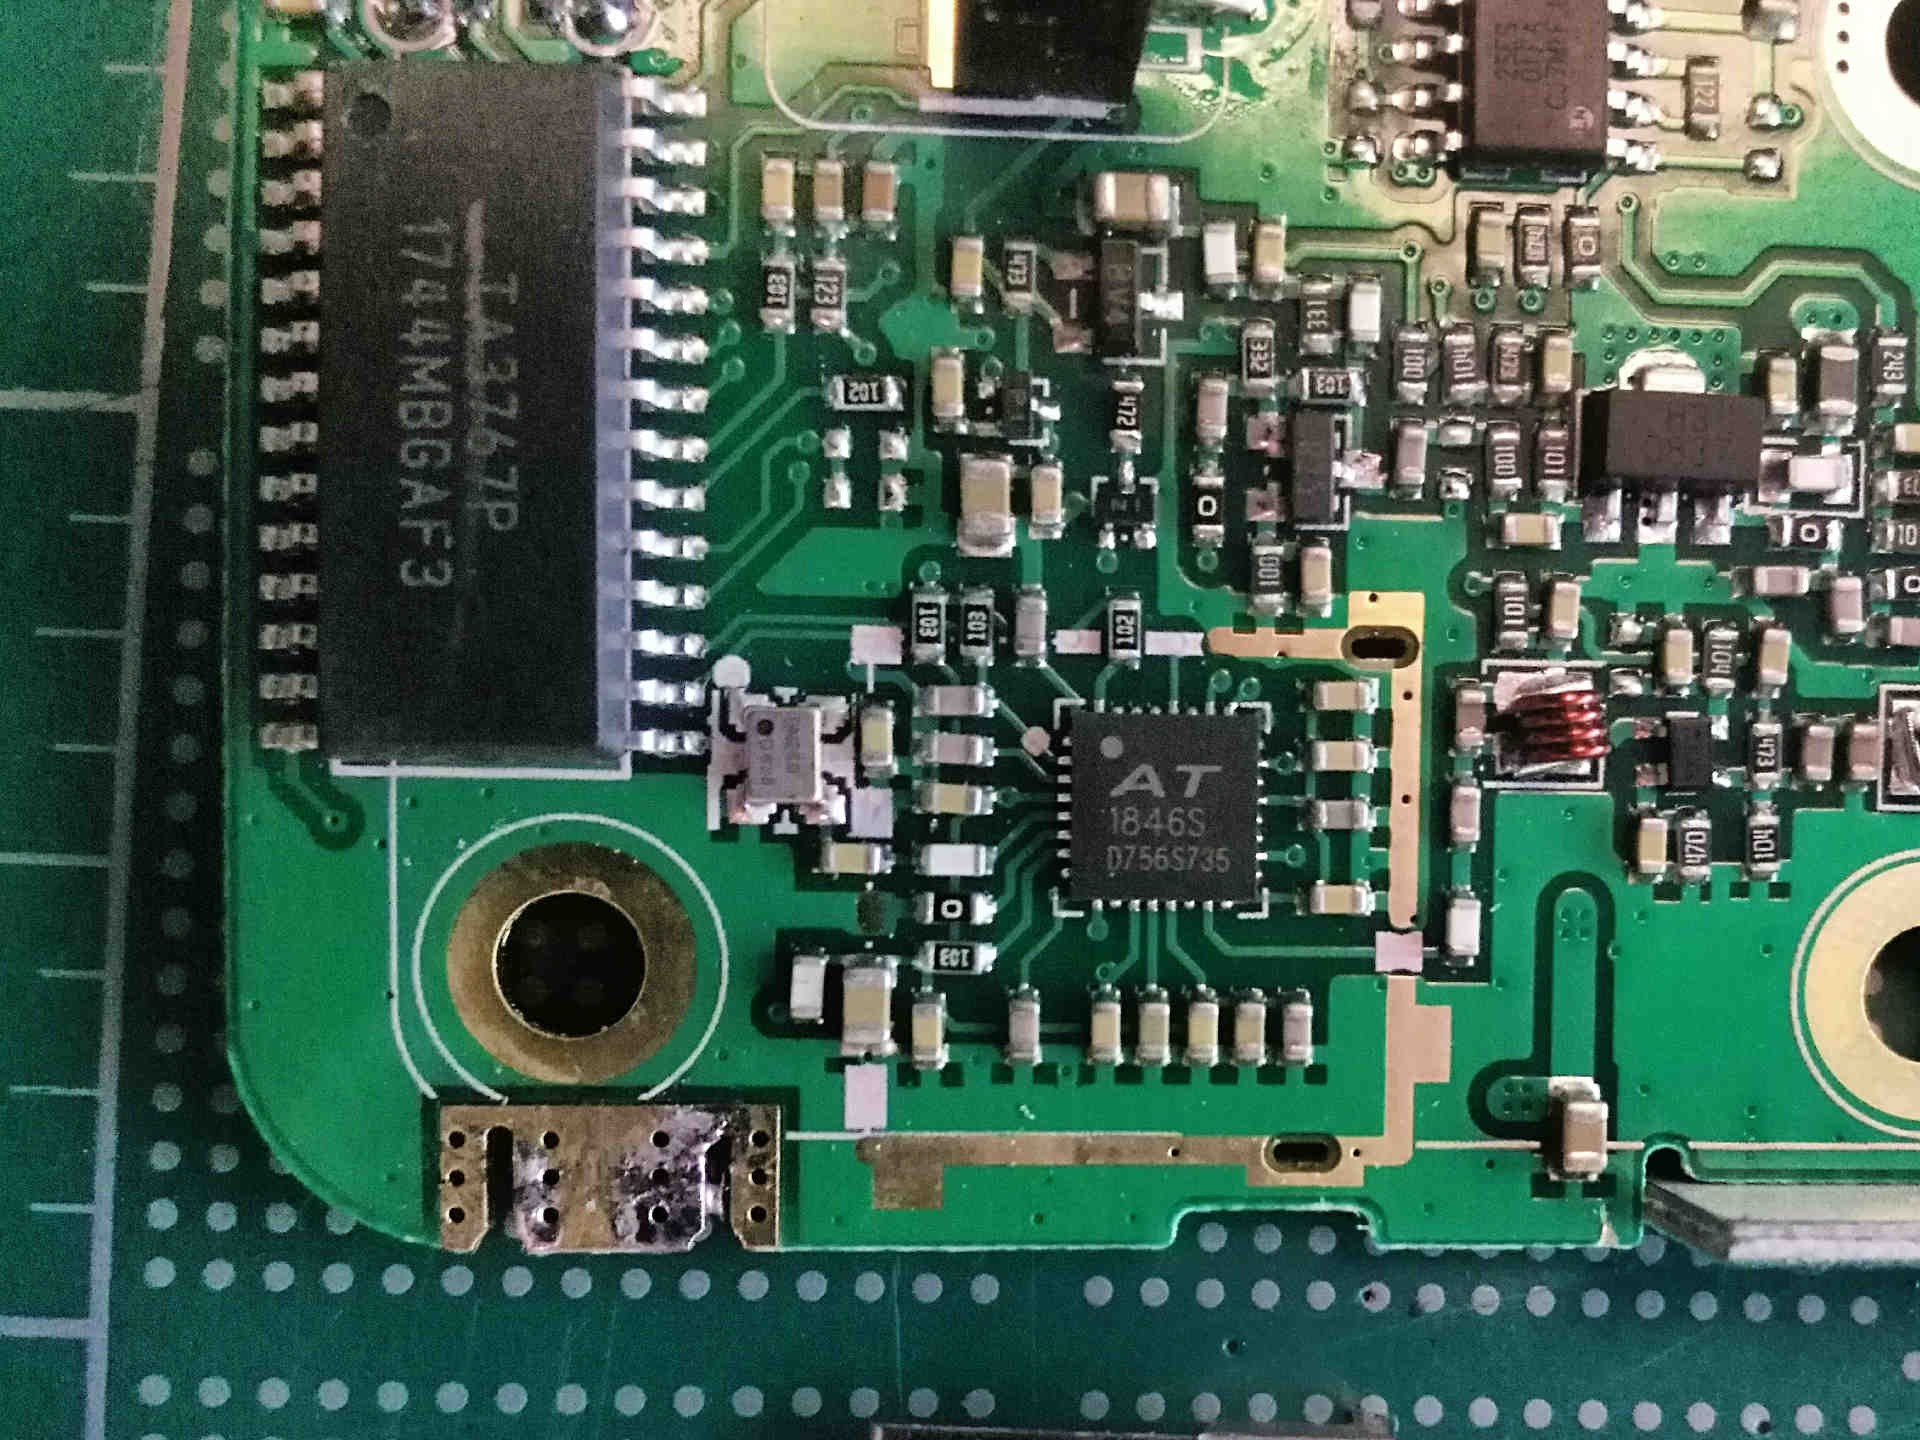 Bottom of the back of the PCB